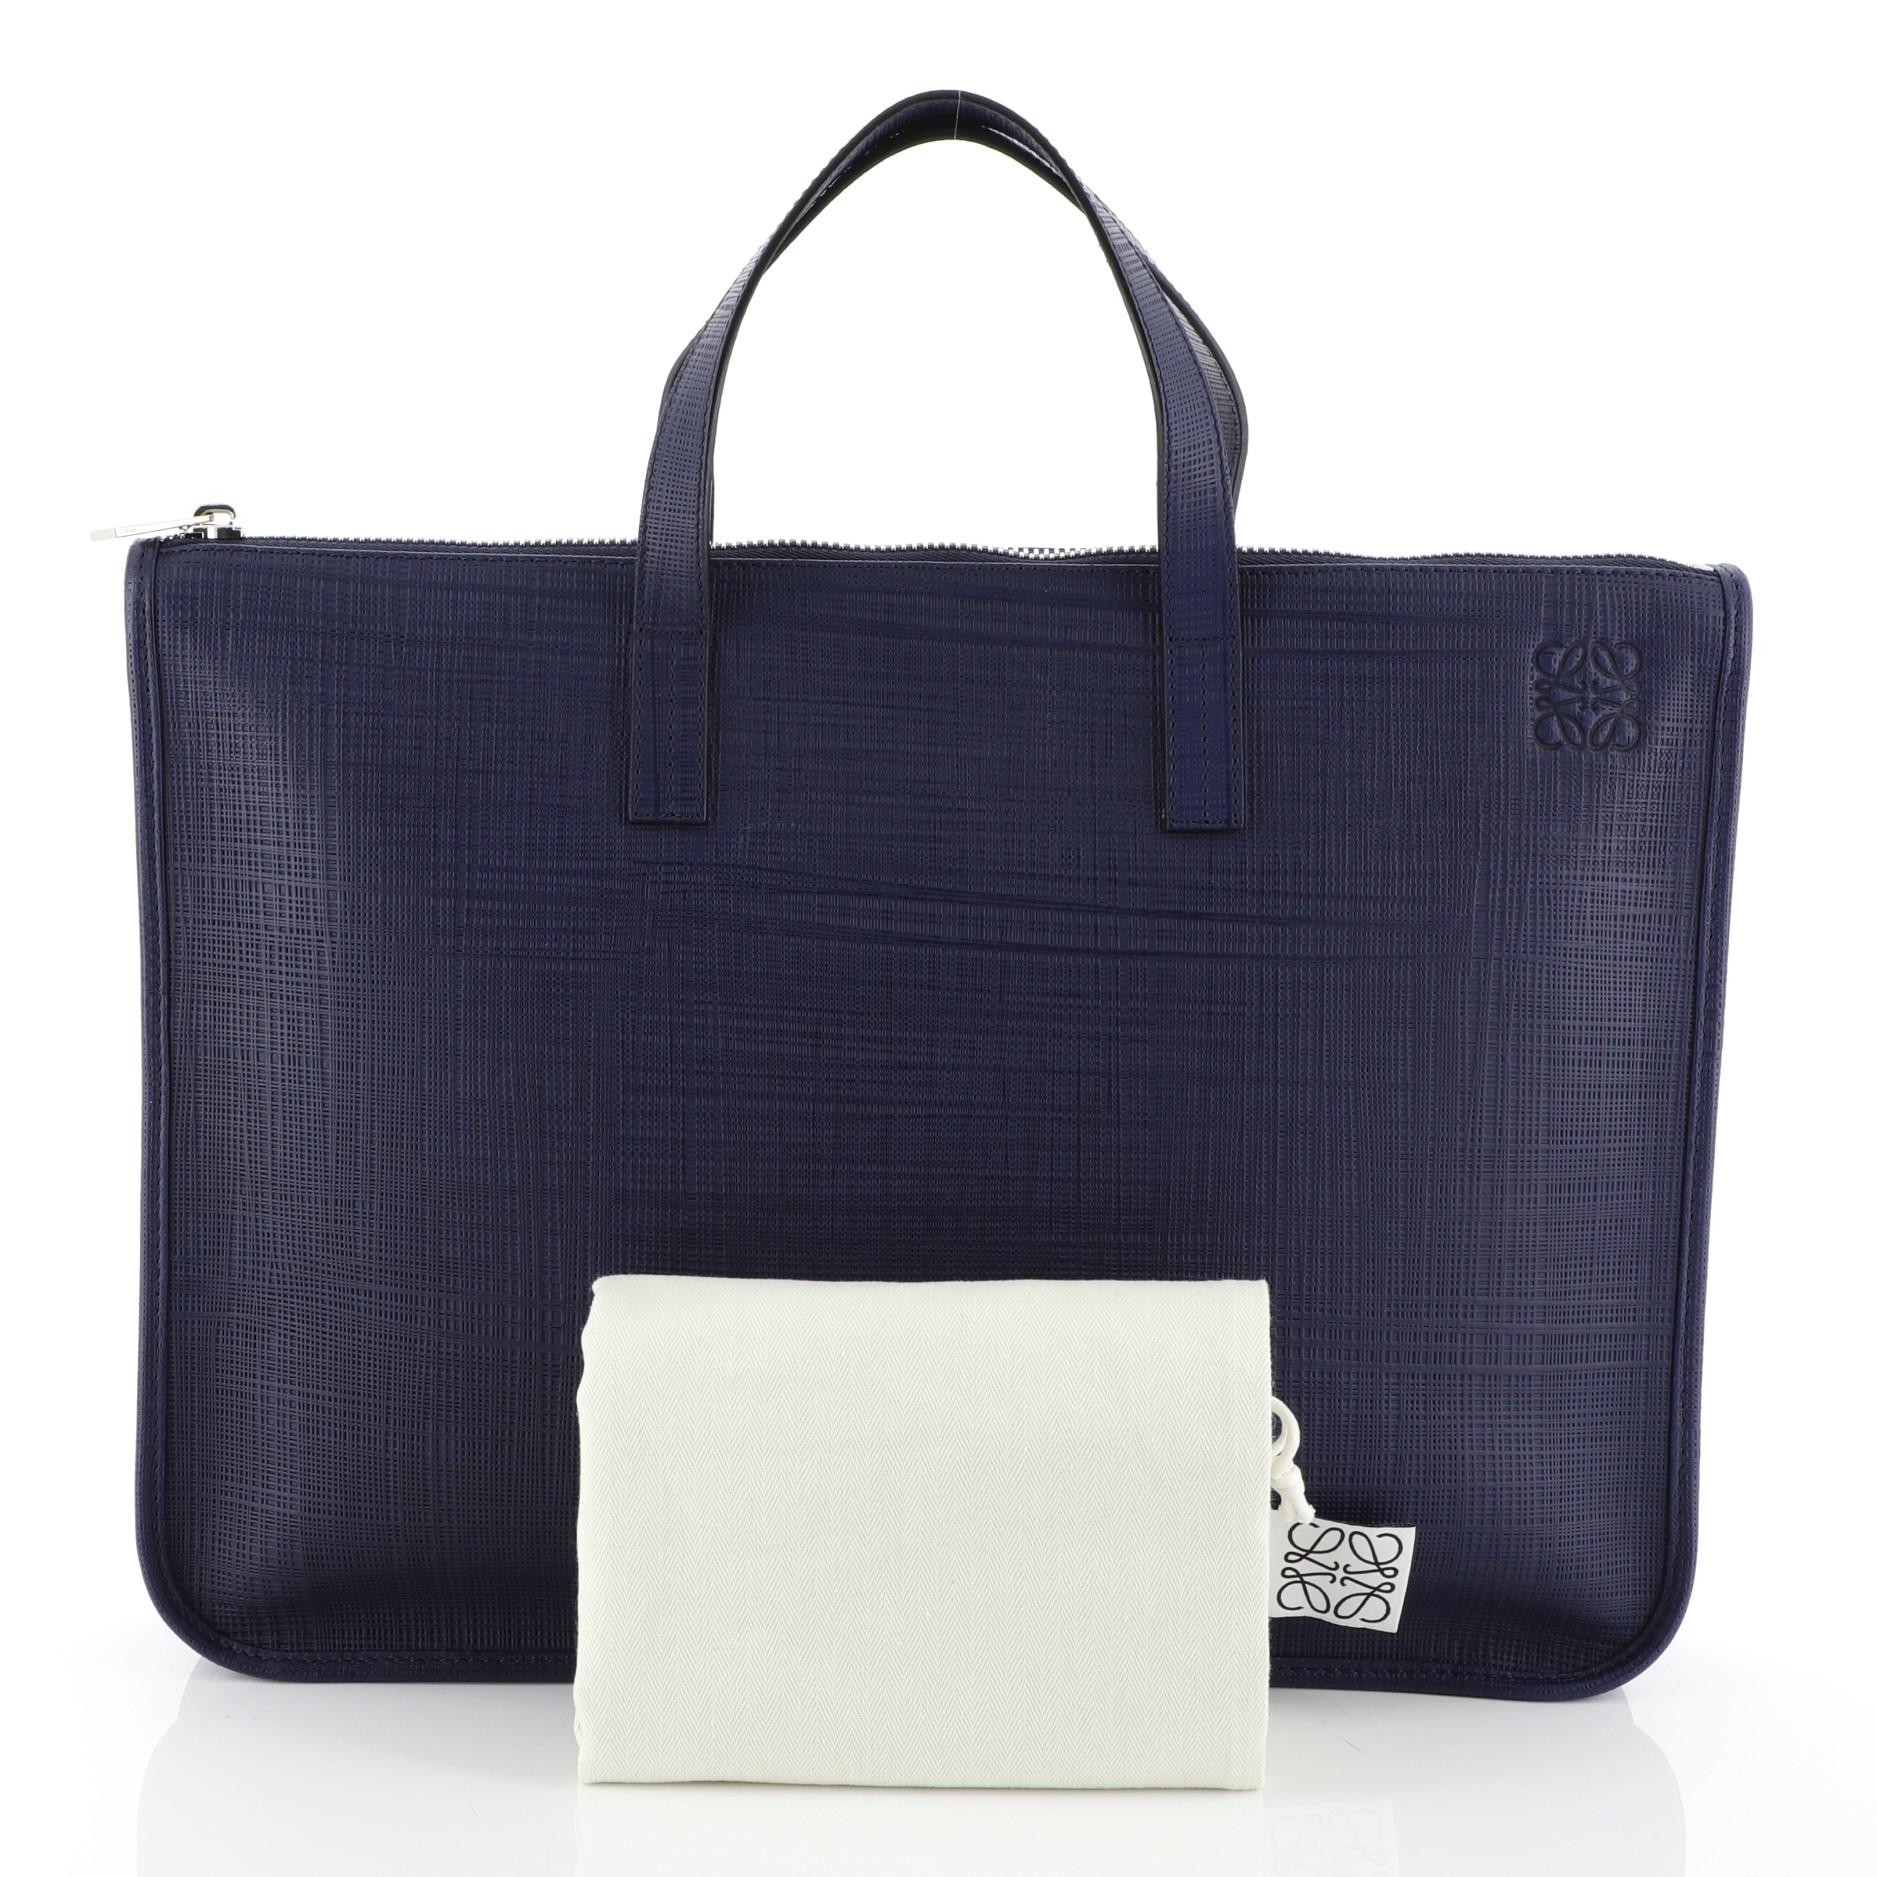 This Loewe Toledo Briefcase Leather Large, crafted from blue leather, features dual top handles and silver-tone hardware. Its zip closure opens to a neutral fabric interior with zip and slip pockets. 

Estimated Retail Price: $1,490
Condition: